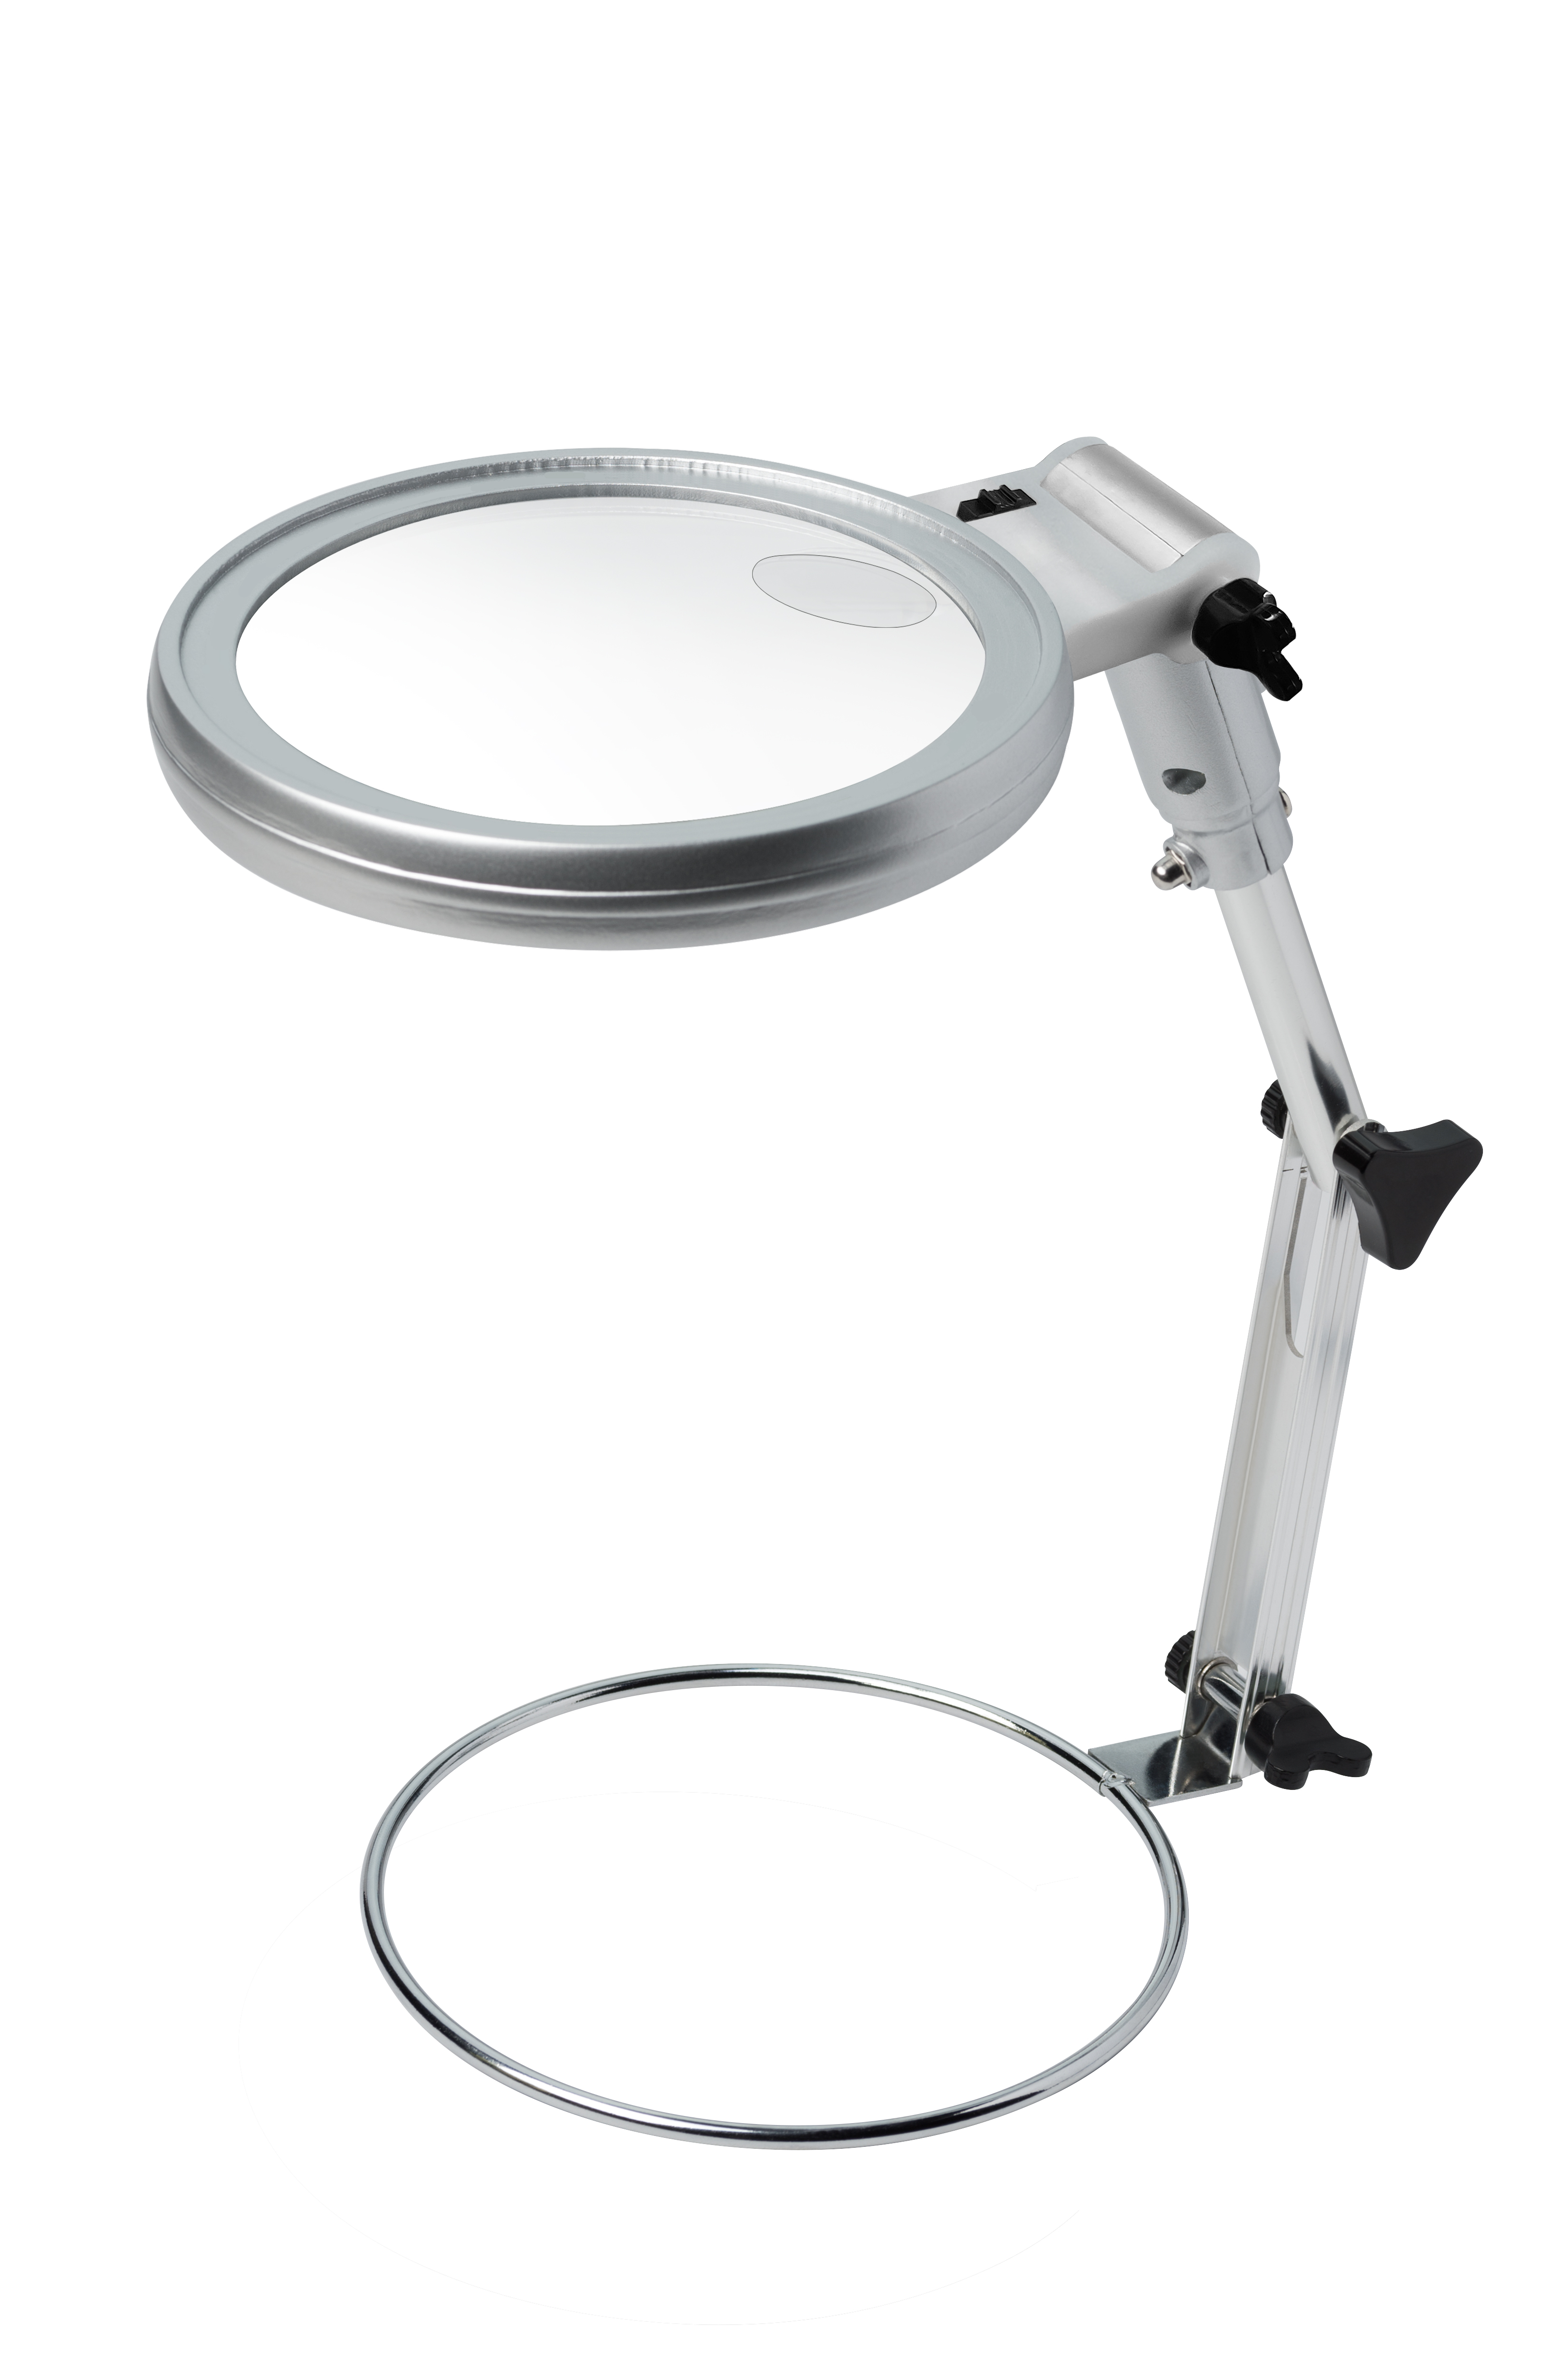 BRESSER Sewing Magnifier 2x/4x with LED Illumination, Diameter 120 mm (Refurbished)